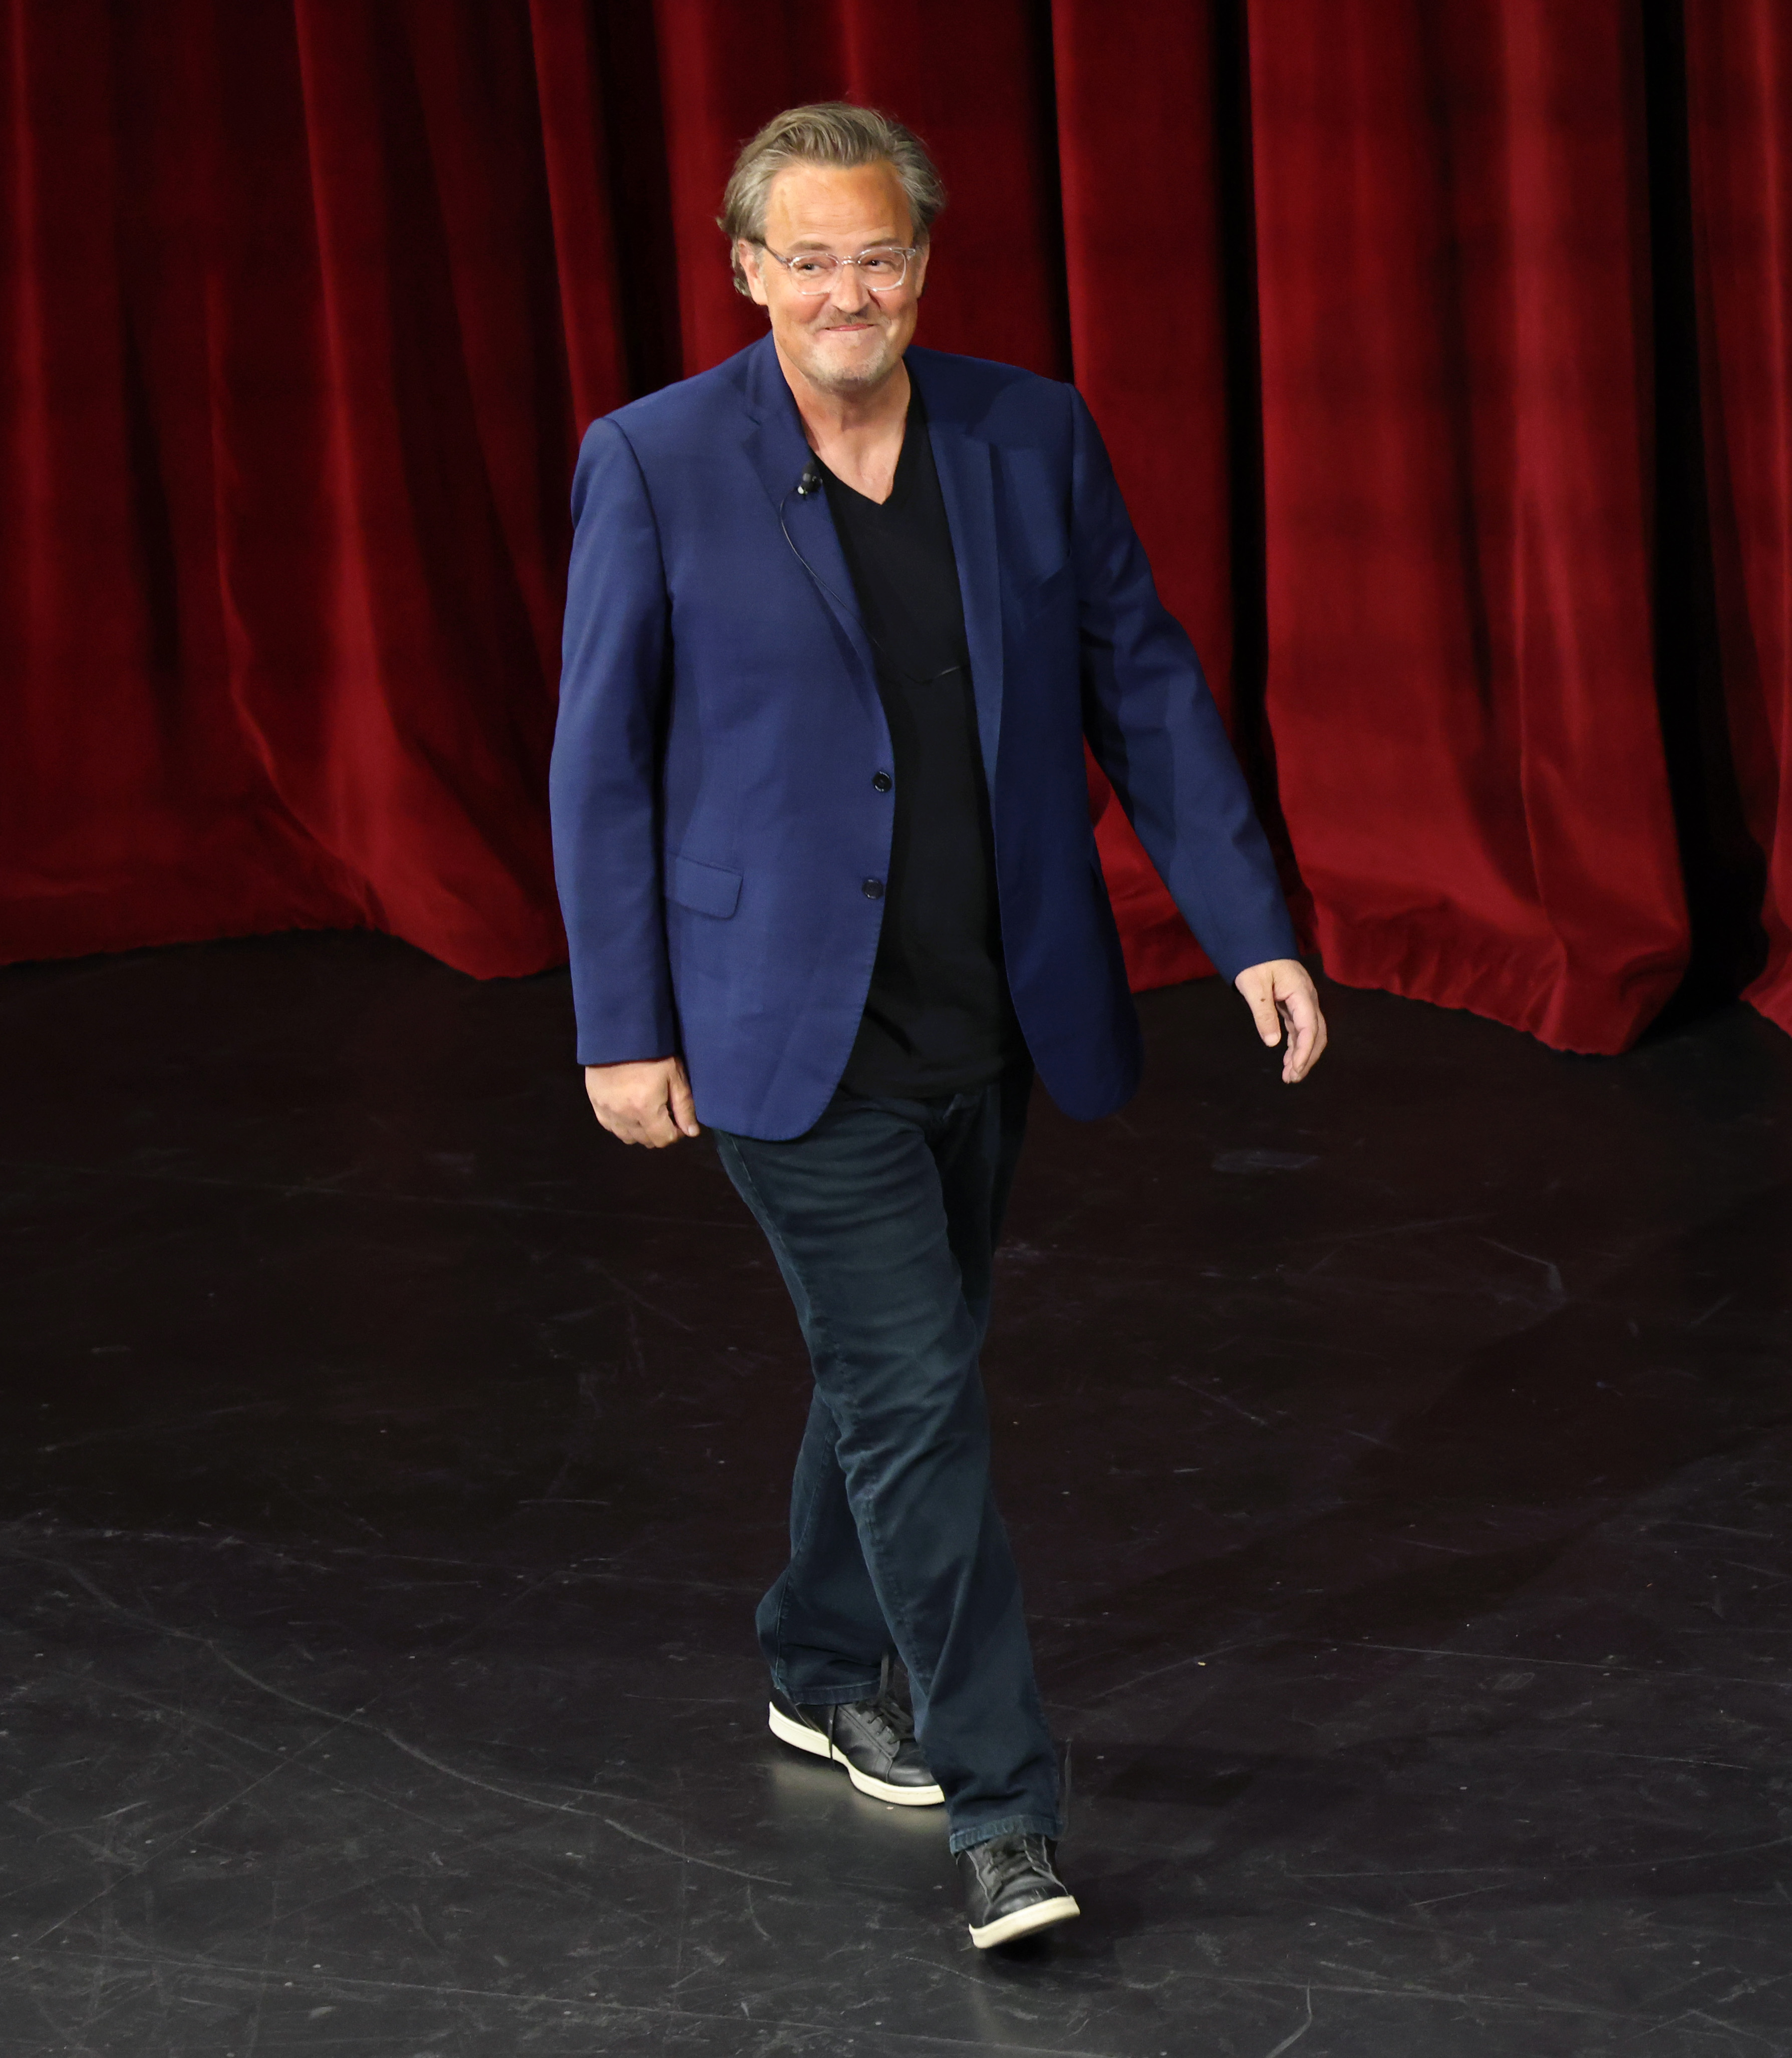 Matthew Perry appears on stage at the Los Angeles Times Festival of Books in Los Angeles, California on April 22, 2023. | Source: Getty Images